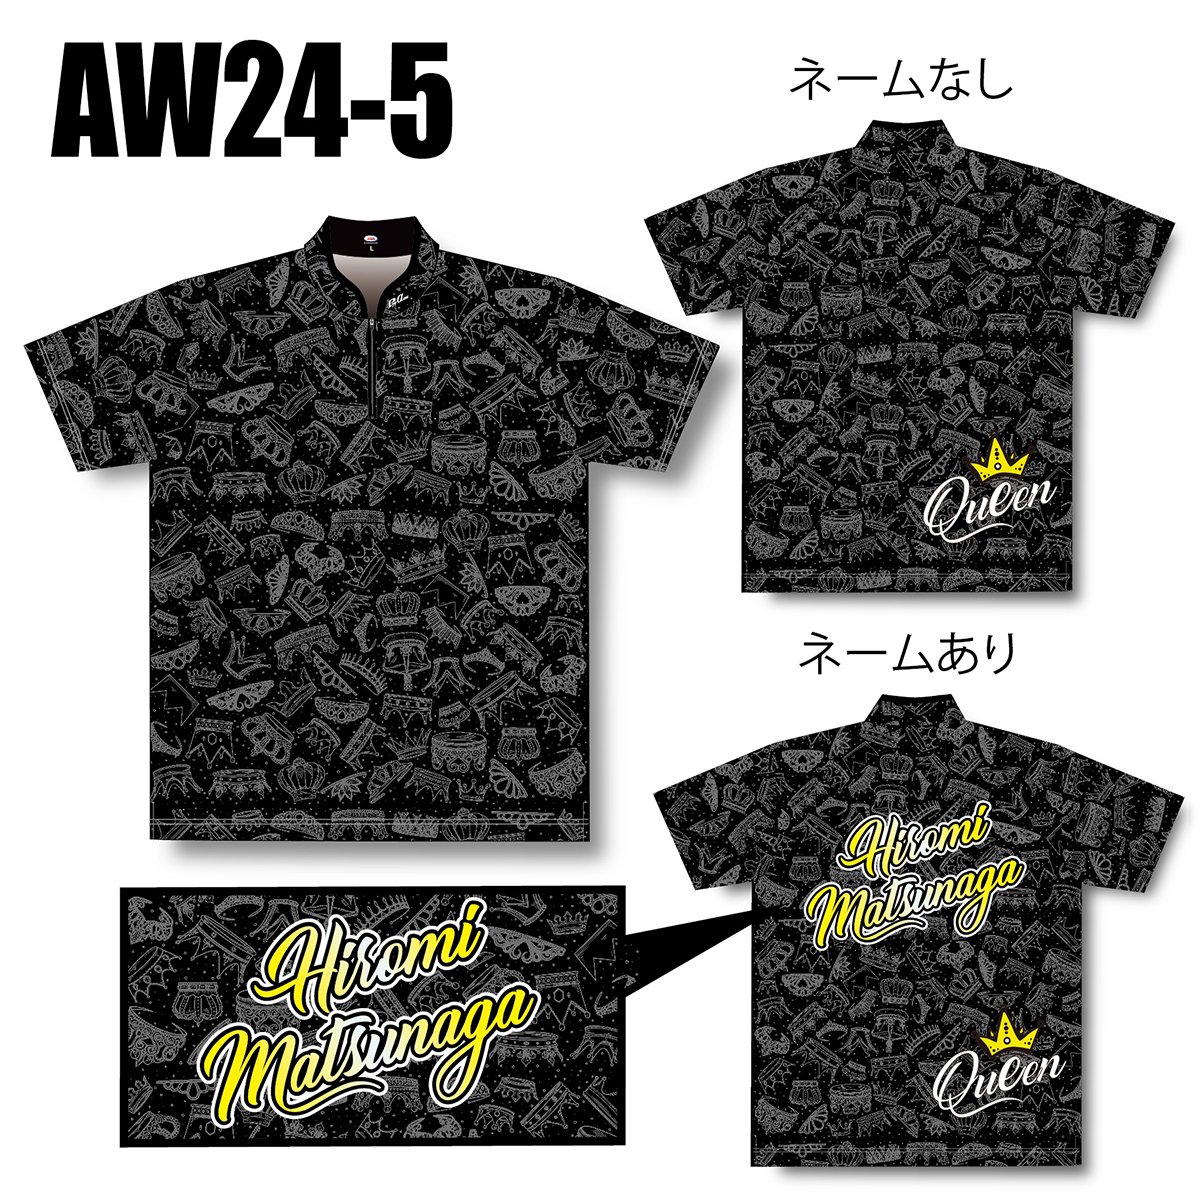 TEAM QUEENモデル(AW24-5・BLACK)